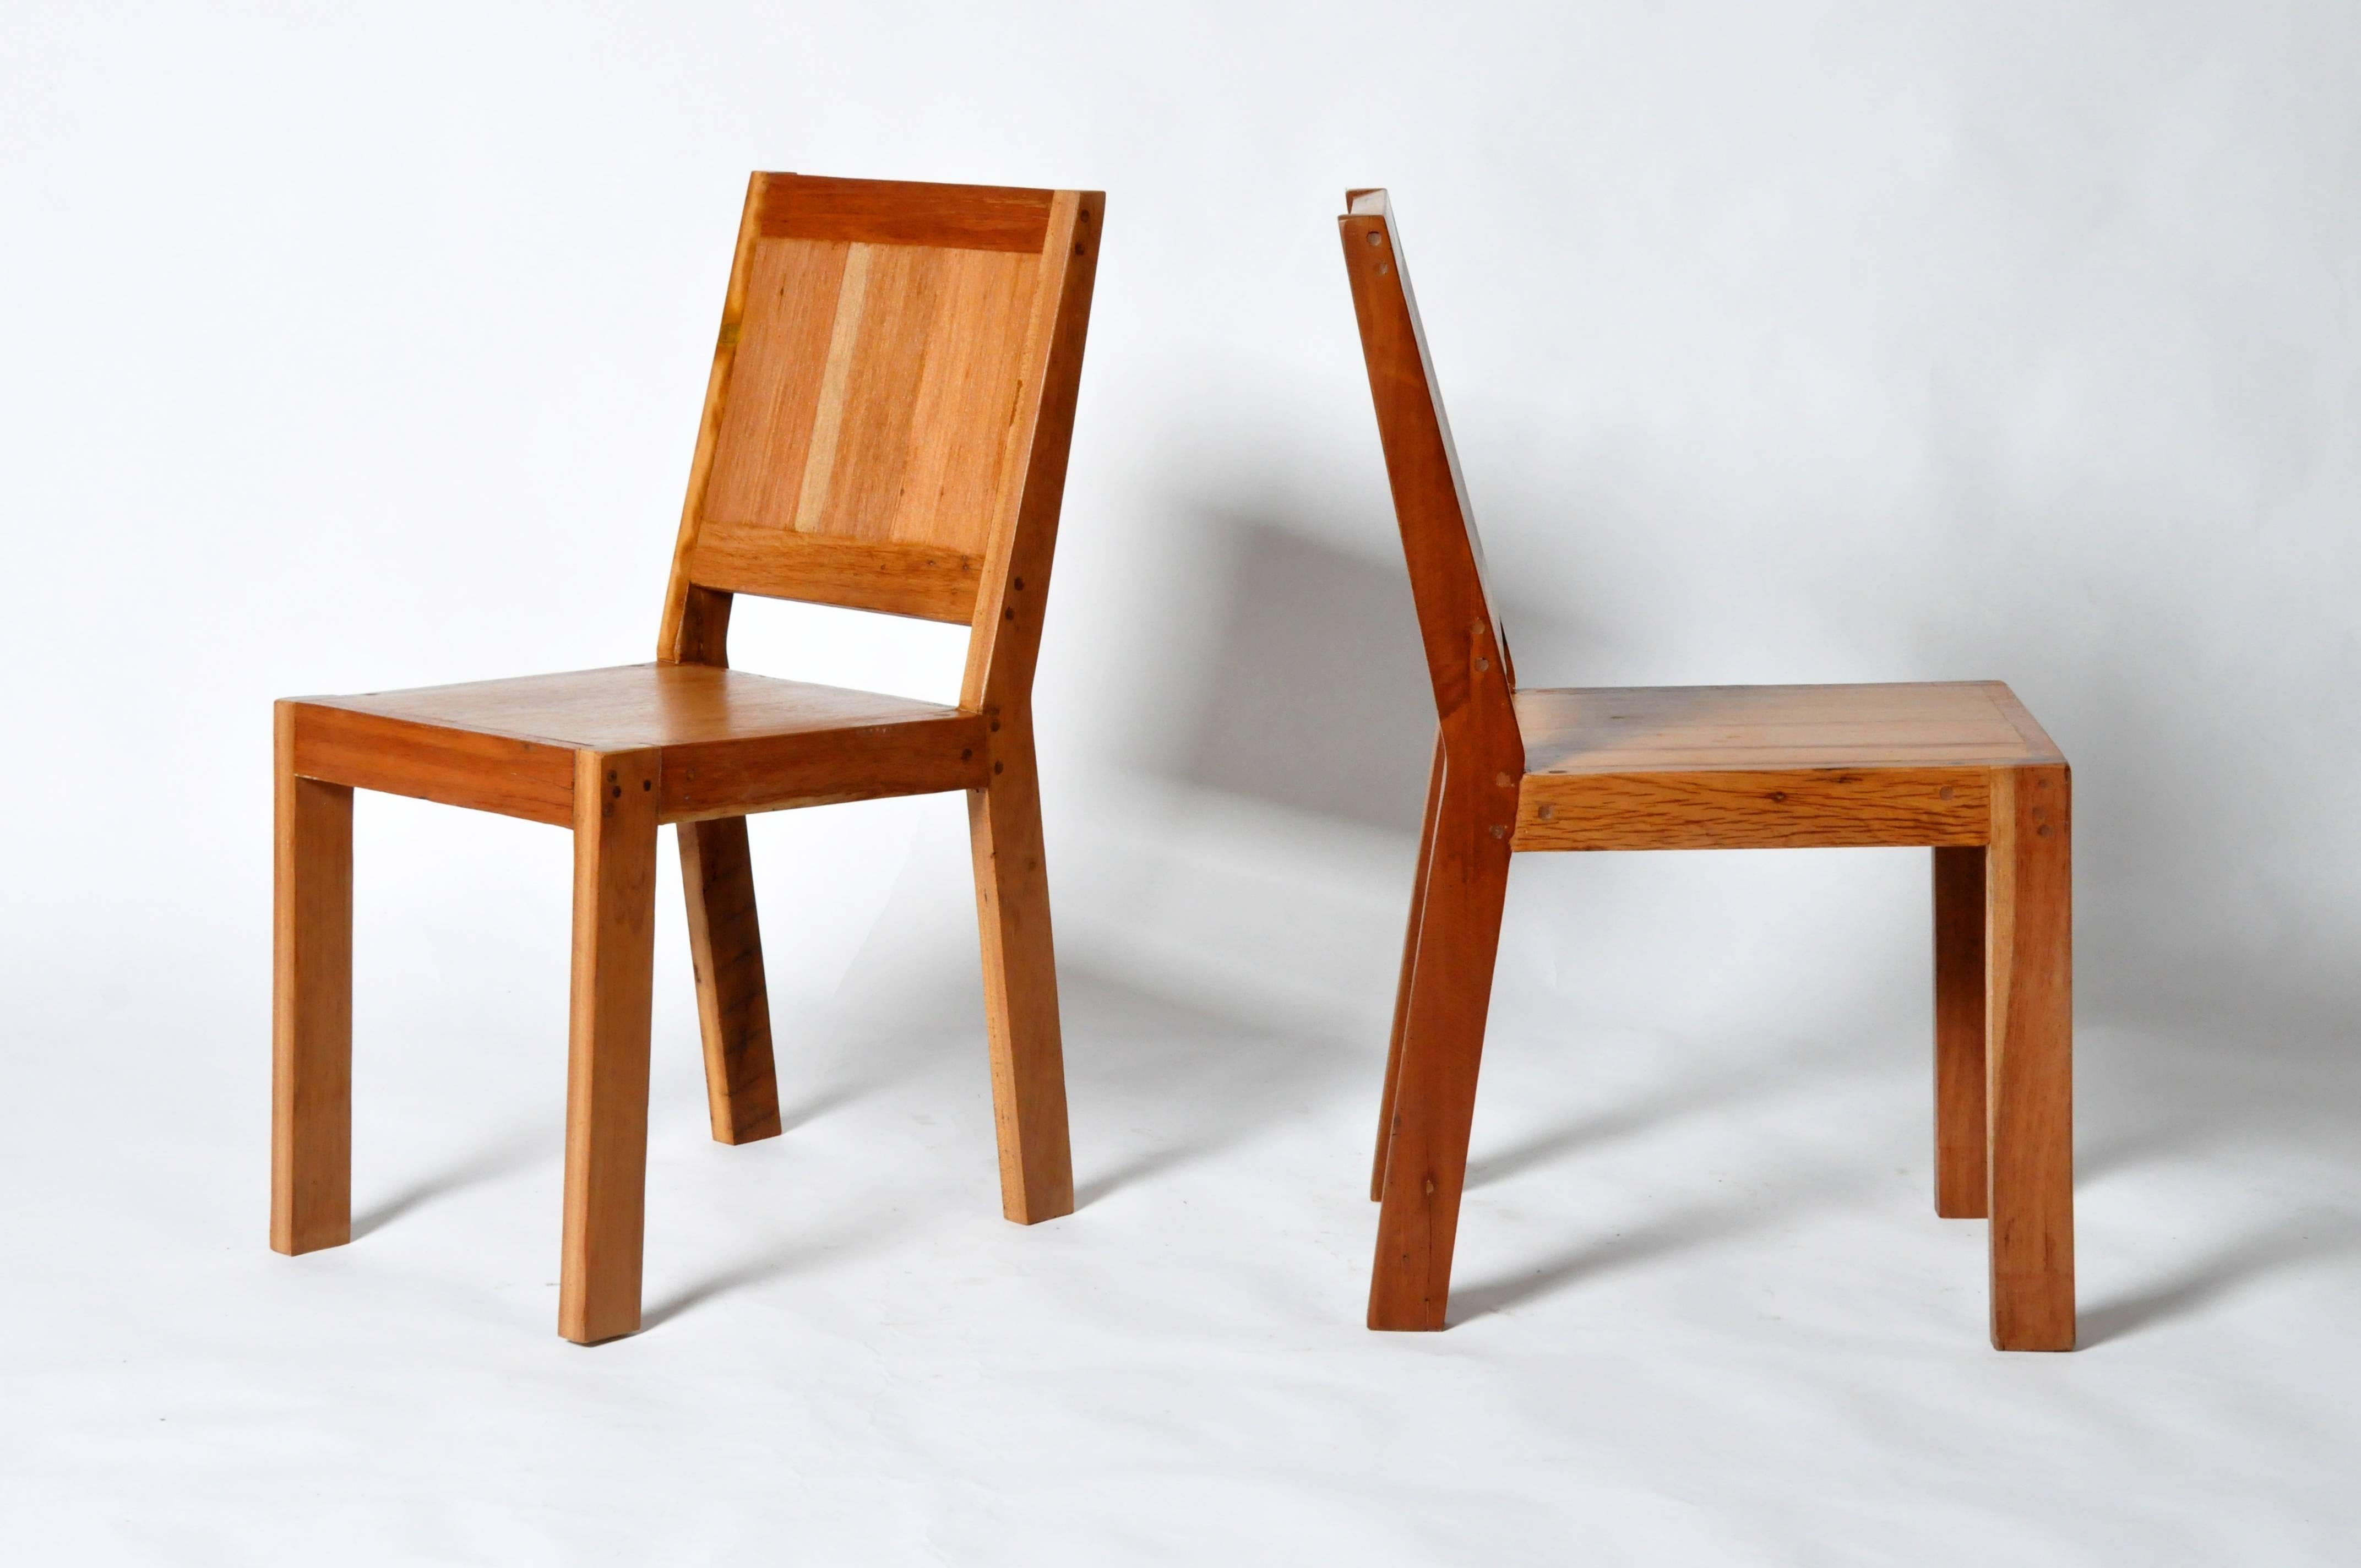 These custom designed chairs were designed our Atelier and made from reclaimed teak wood. They are comfortable and sturdy chairs with clean lines.